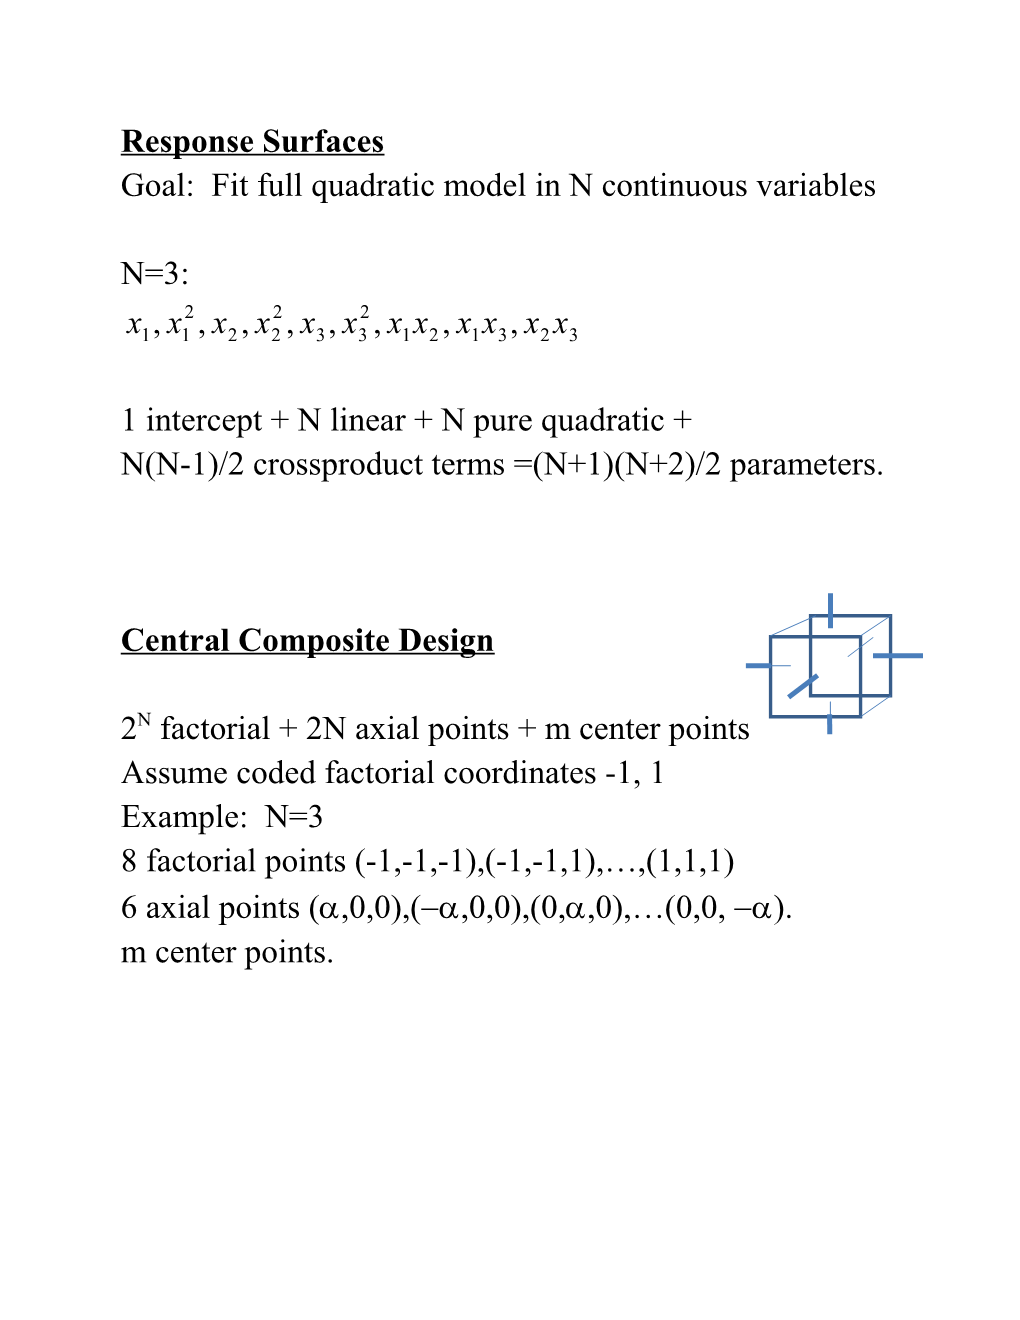 Goal: Fit Full Quadratic Model in N Continuous Variables